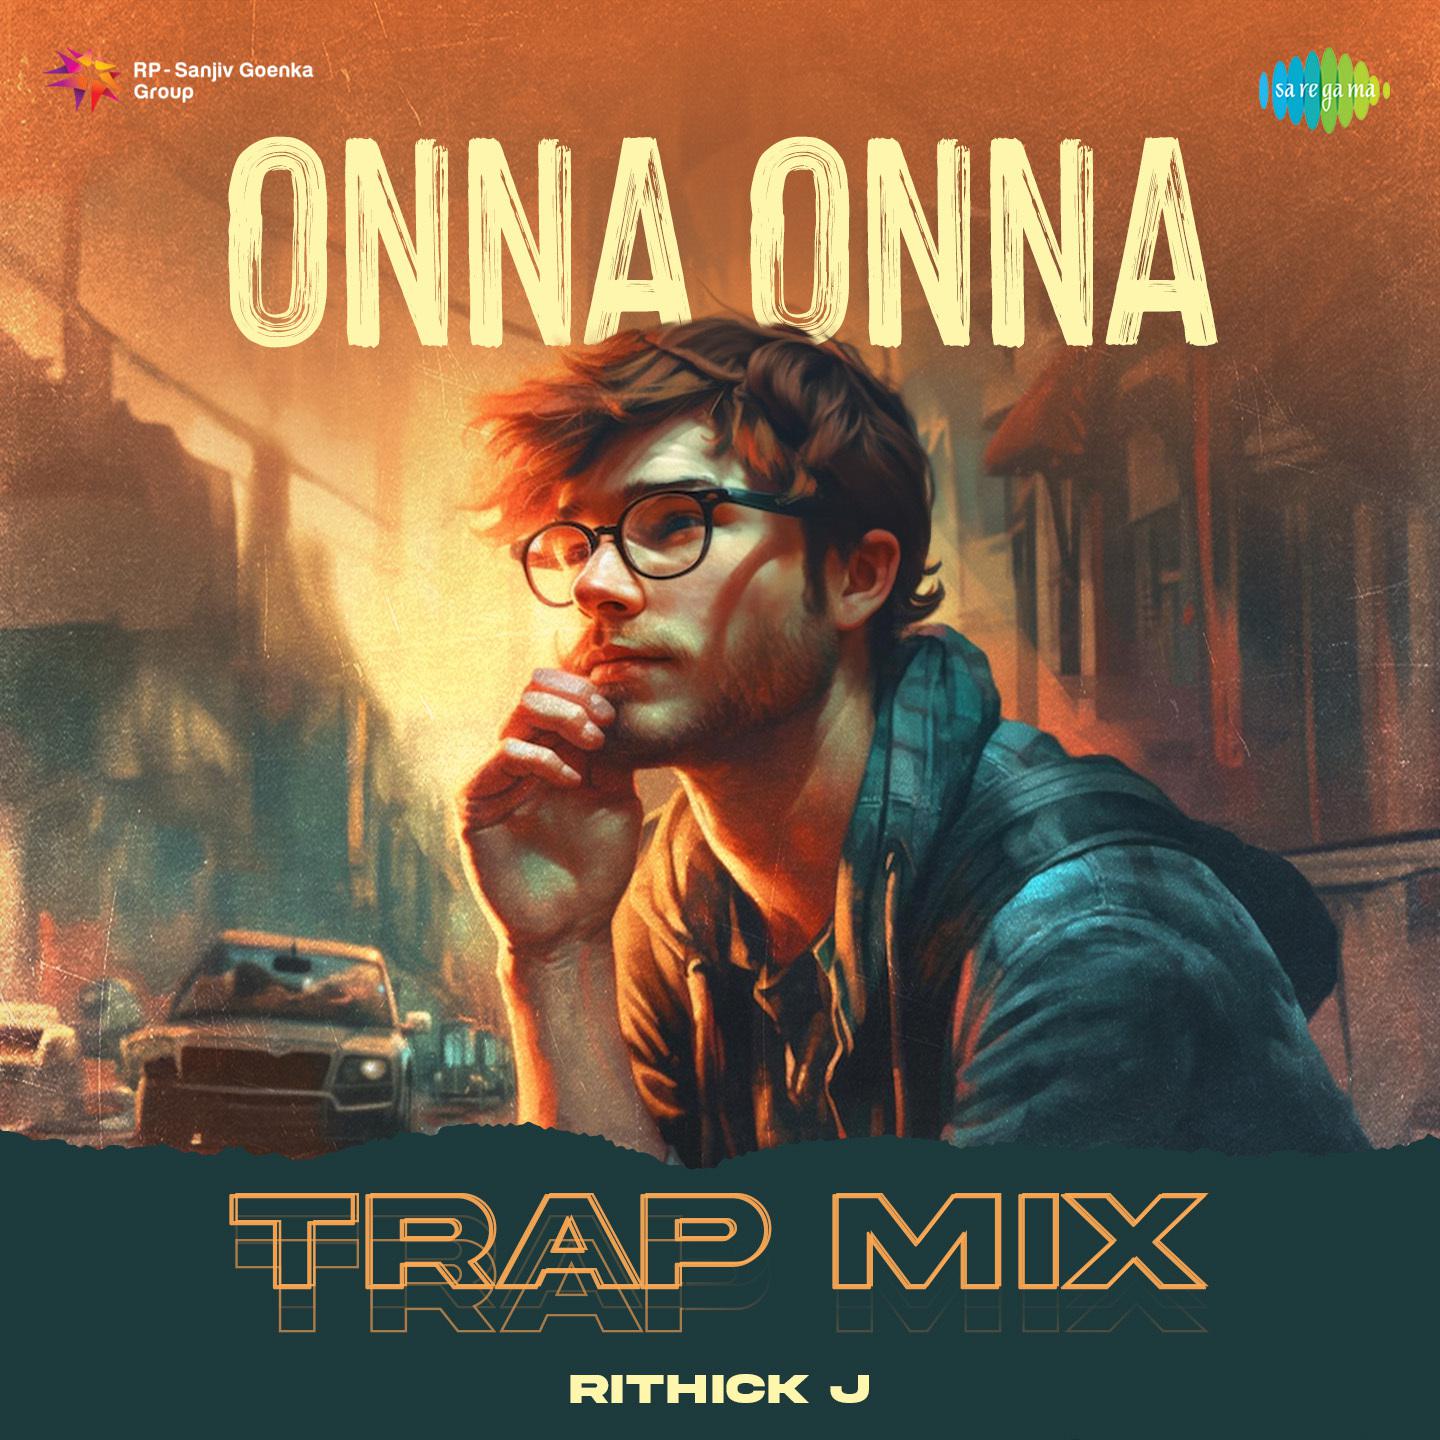 Rithick J - Onna Onna - Trap Mix